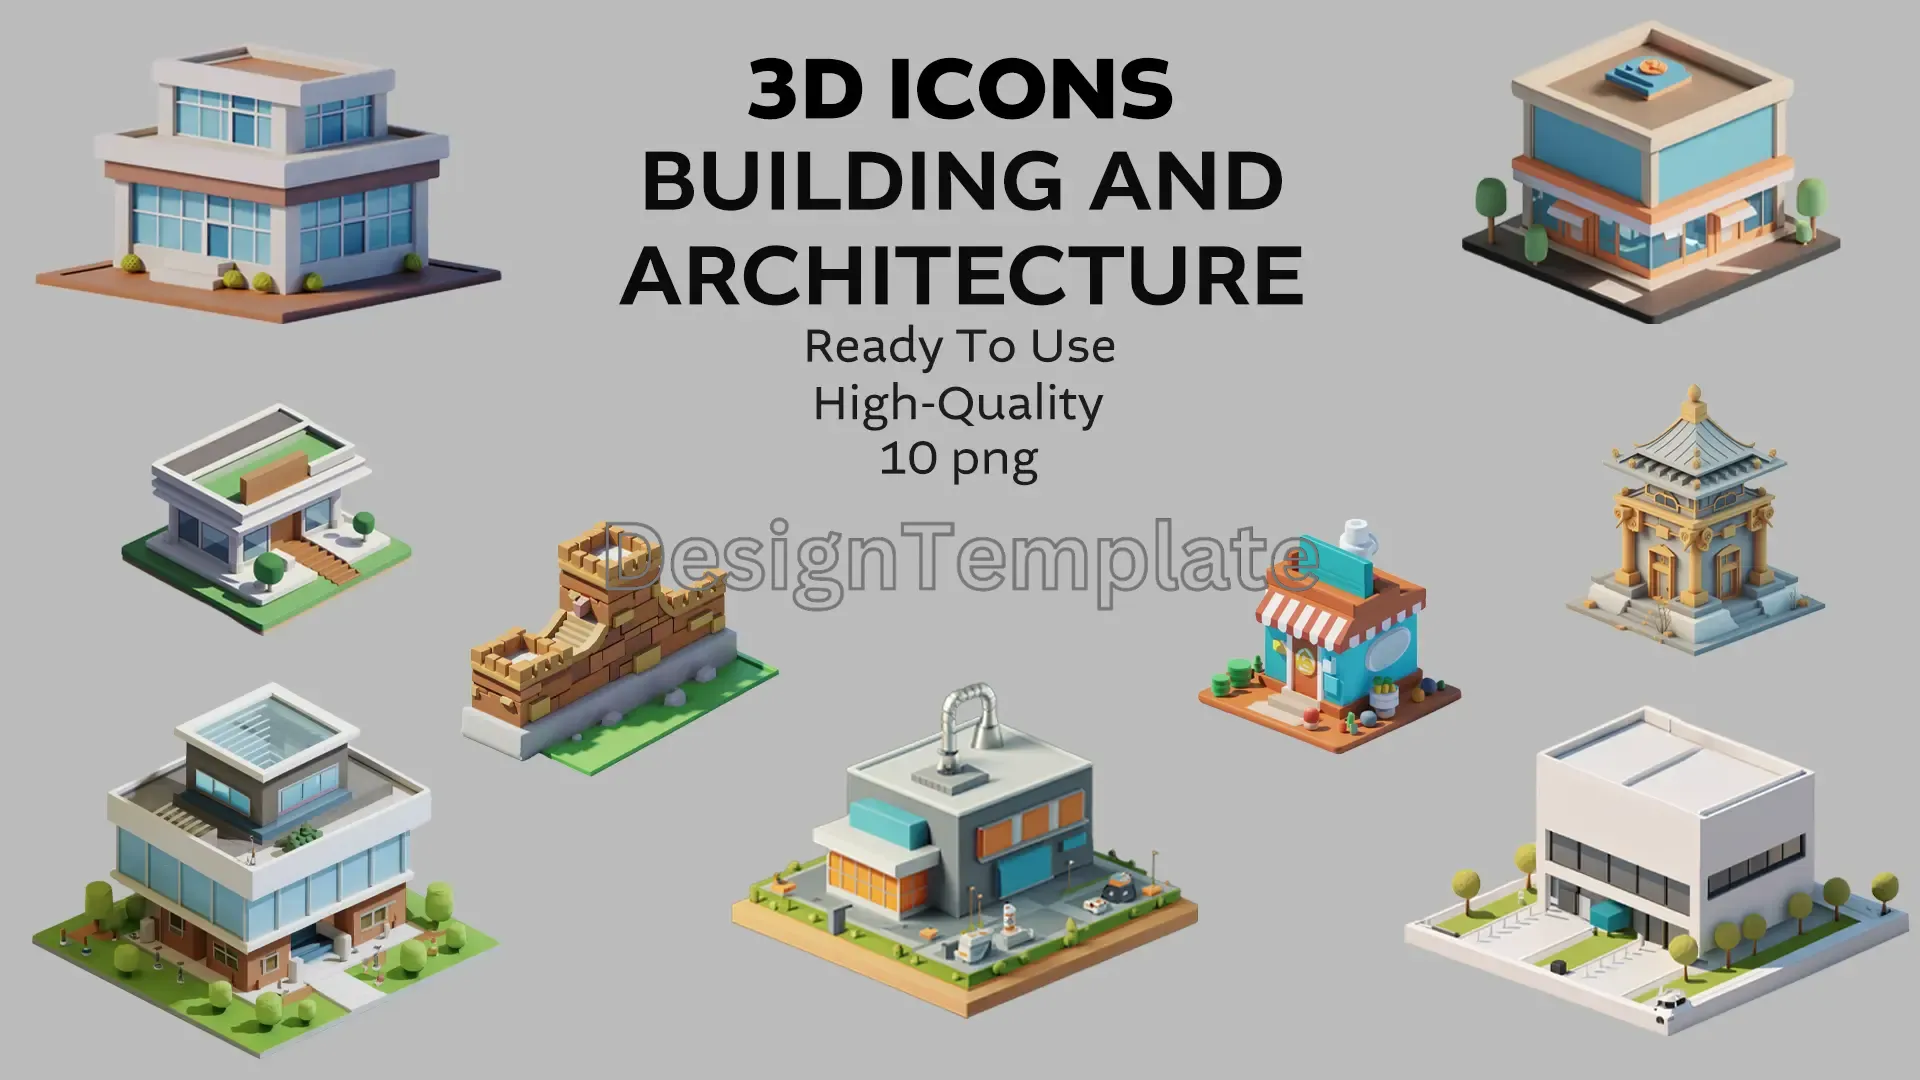 Architectural Wonders 3D Building Icons Collection